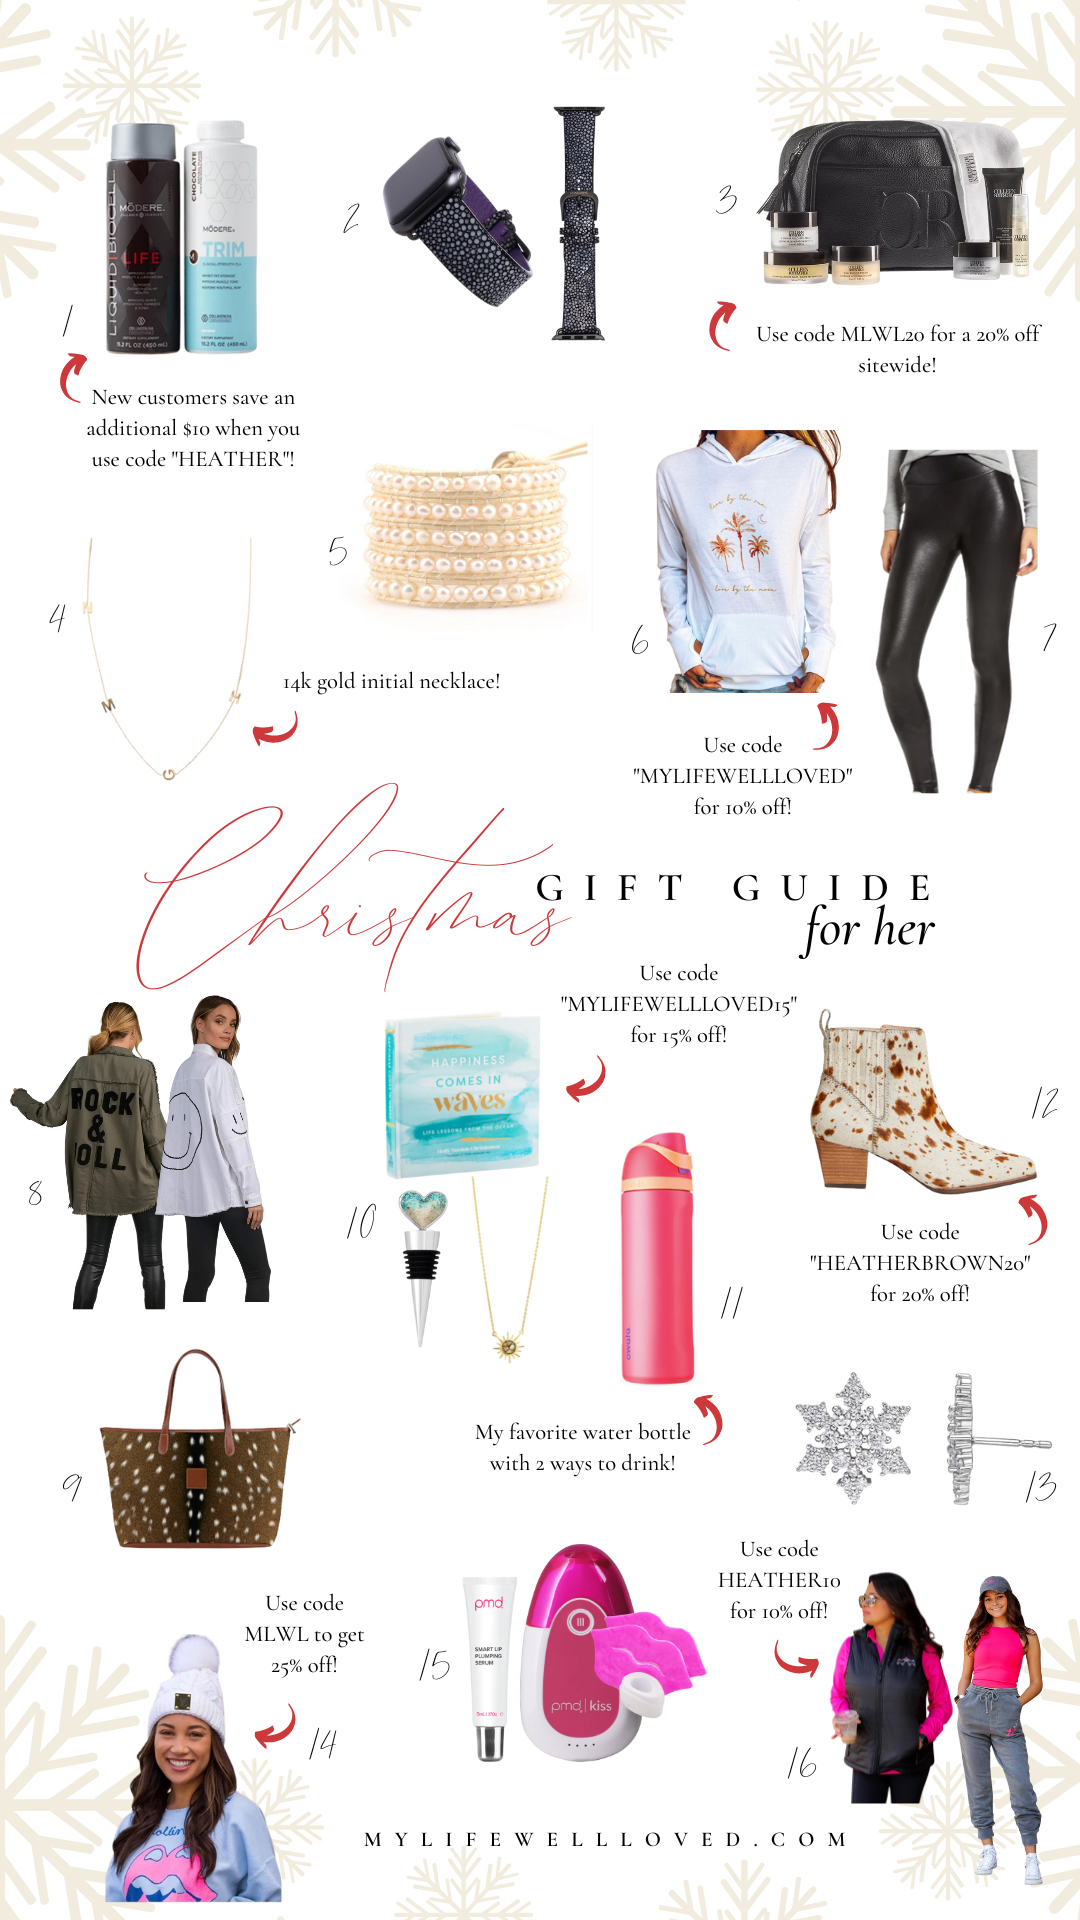 Gift Ideas for Her - Our Women's Gift Guide 